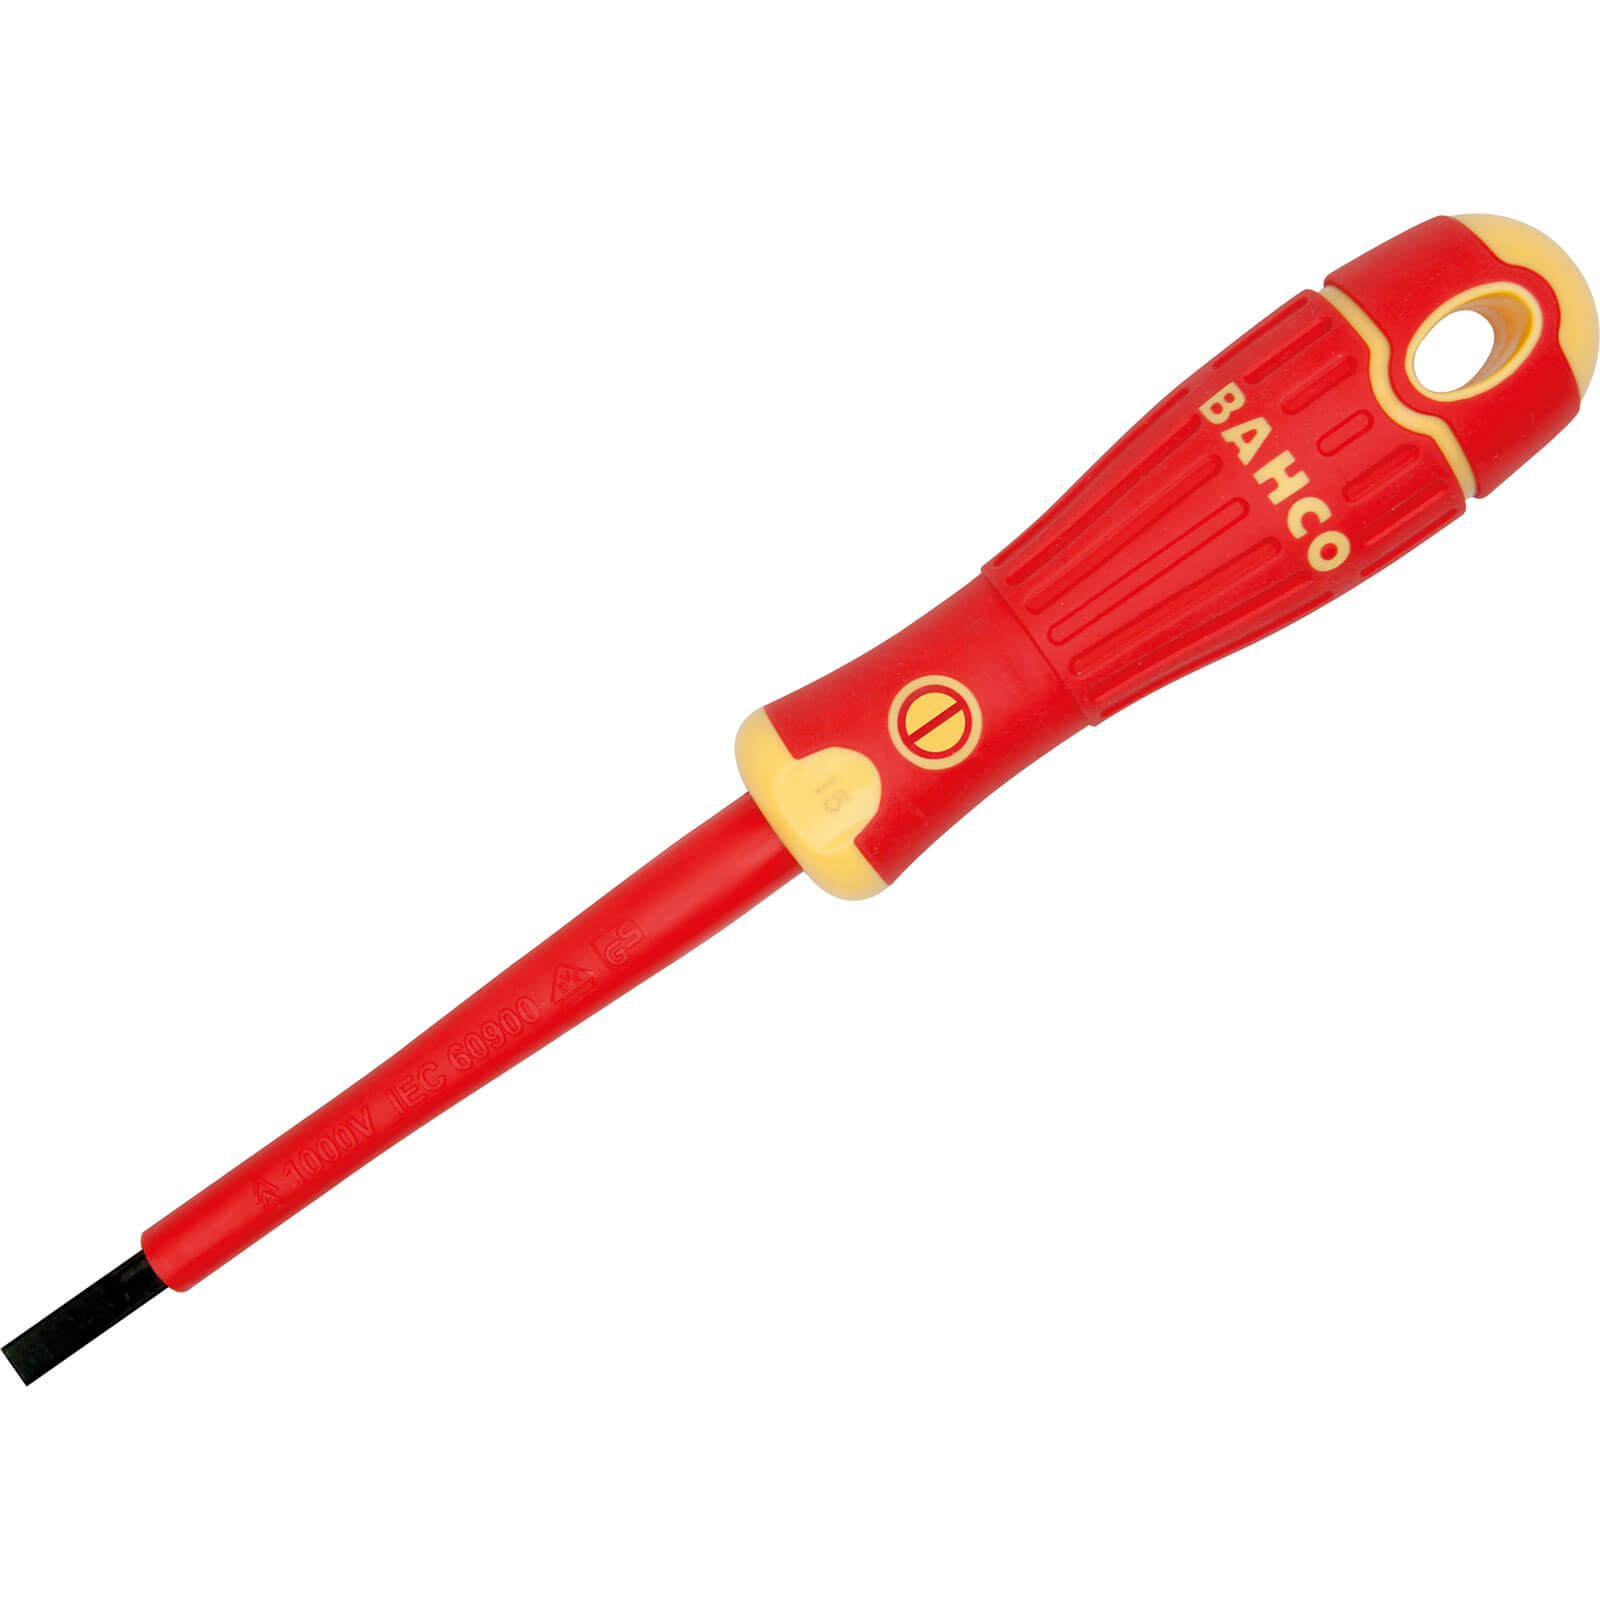 Photo of Bahco Vde Insulated Slotted Screwdriver 3.5mm 100mm